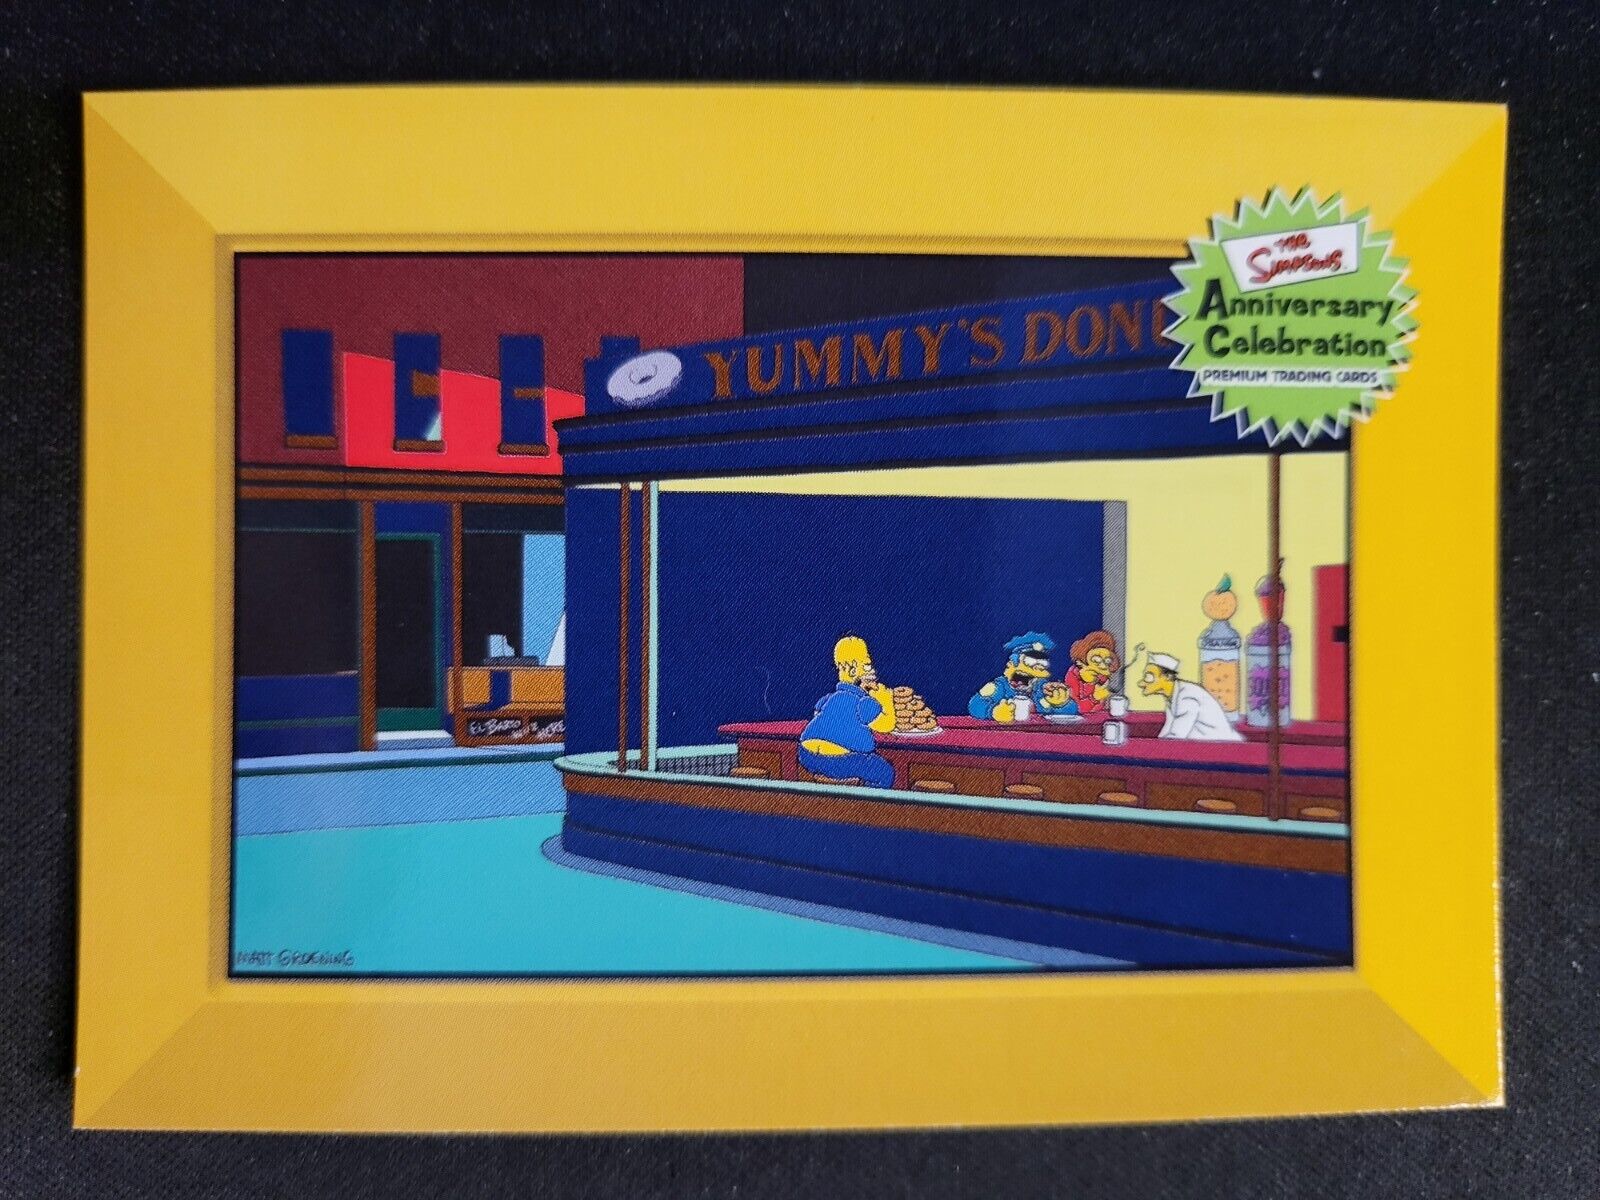 2006 Inkworks The Simpsons Anniversary Art By Bart Homer Card card #47